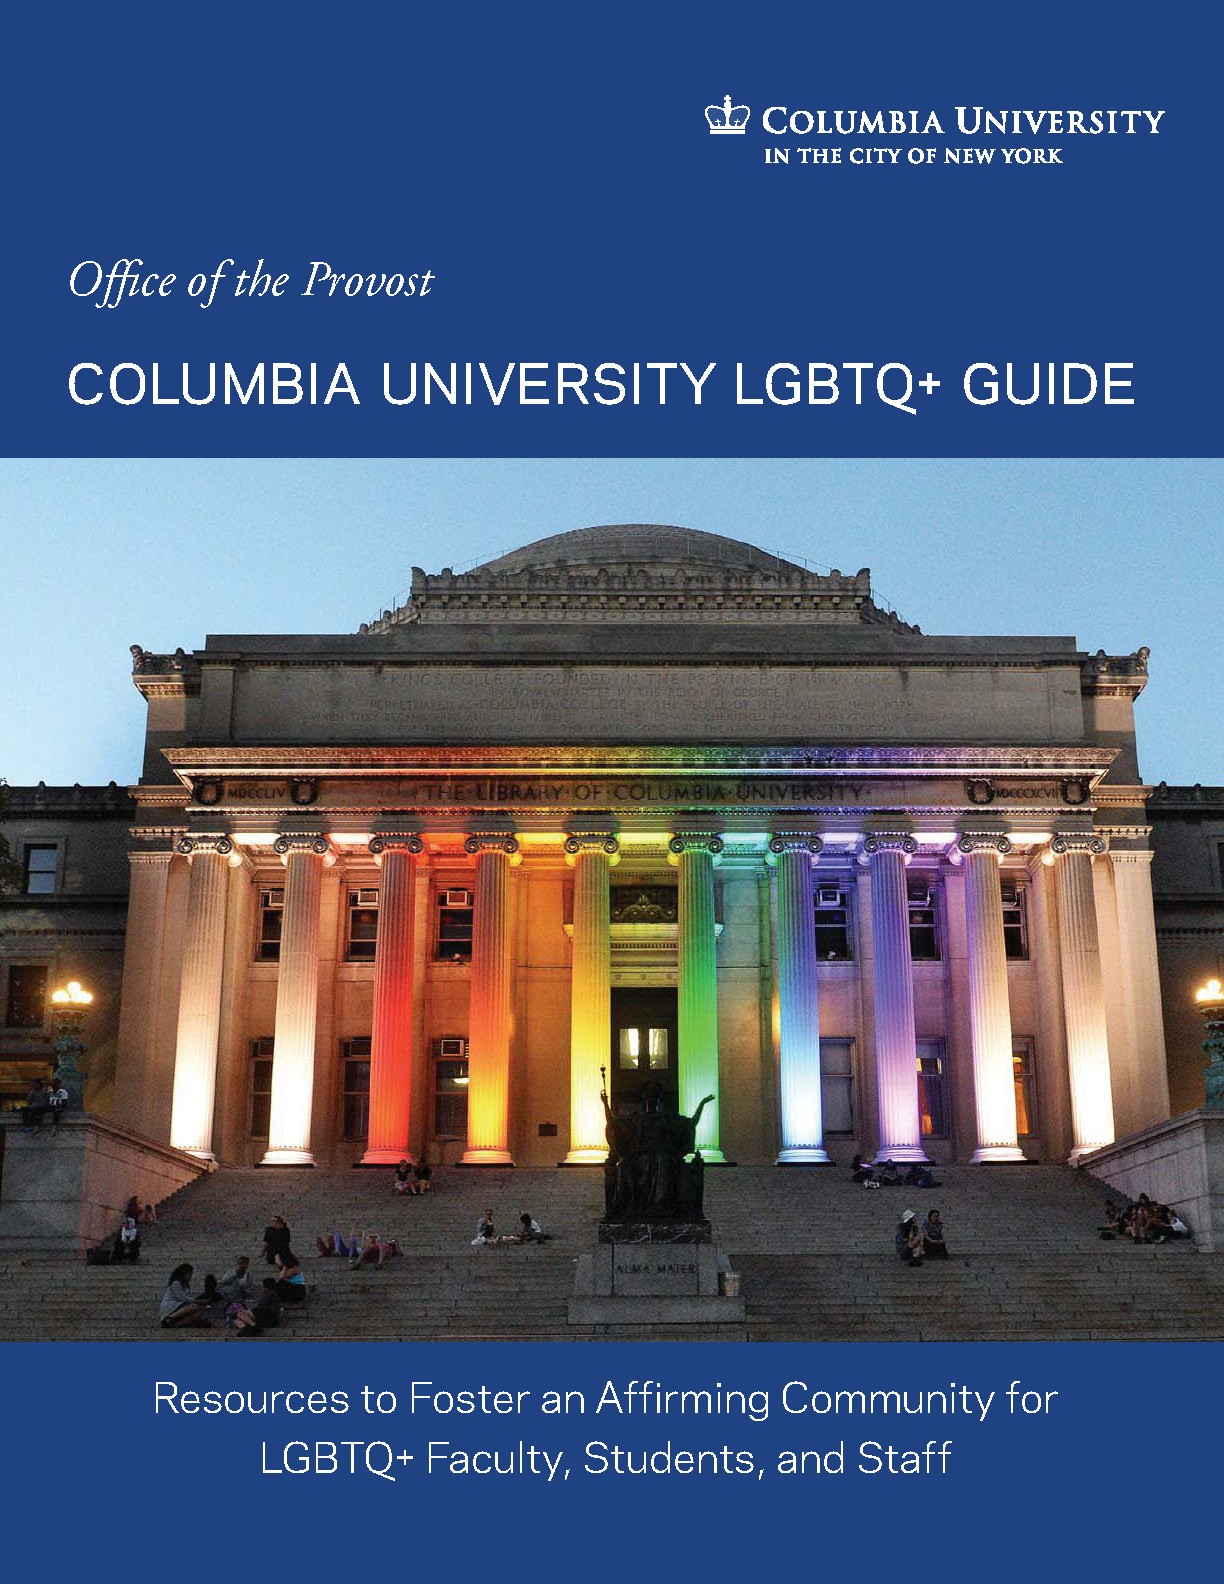 Cover of LGBTQ+ Guide, with blue banner and photo of Low Library illuminated in rainbow lights.